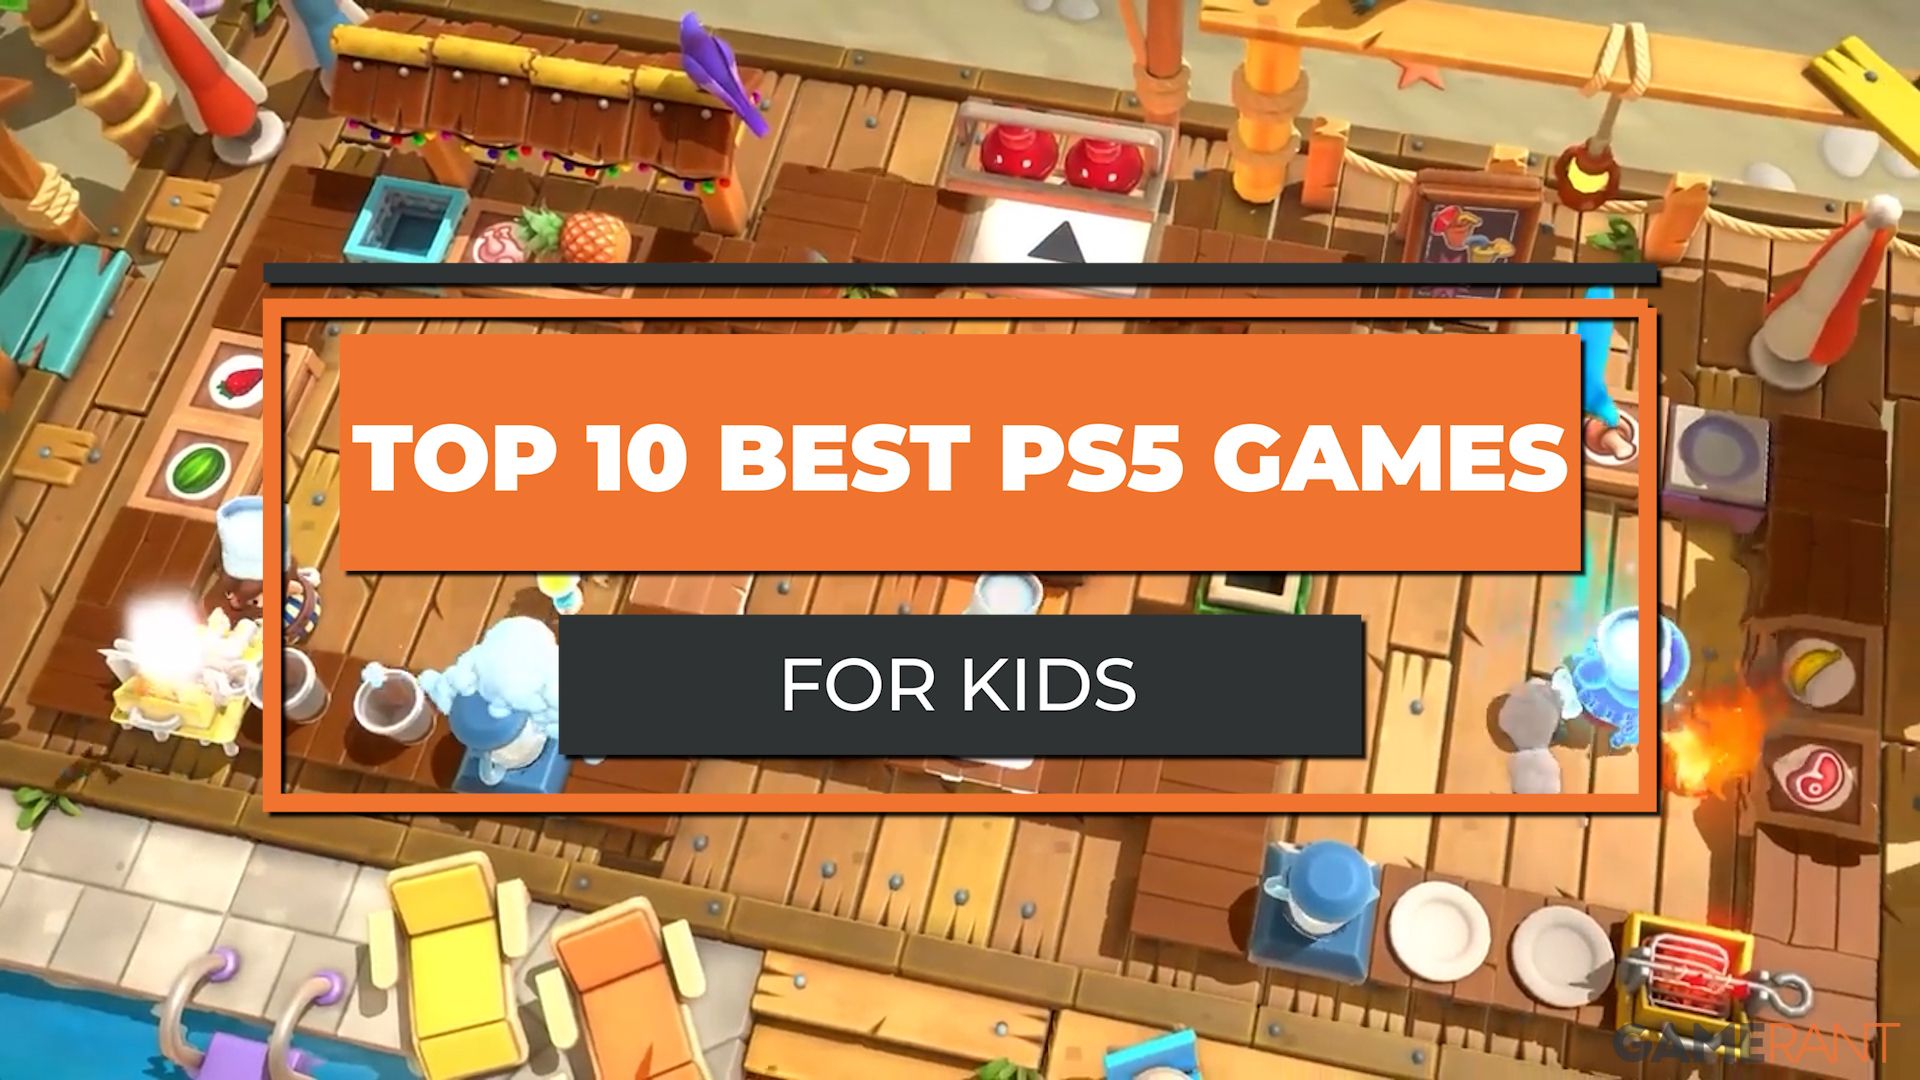 Best PS5 Games For Kids